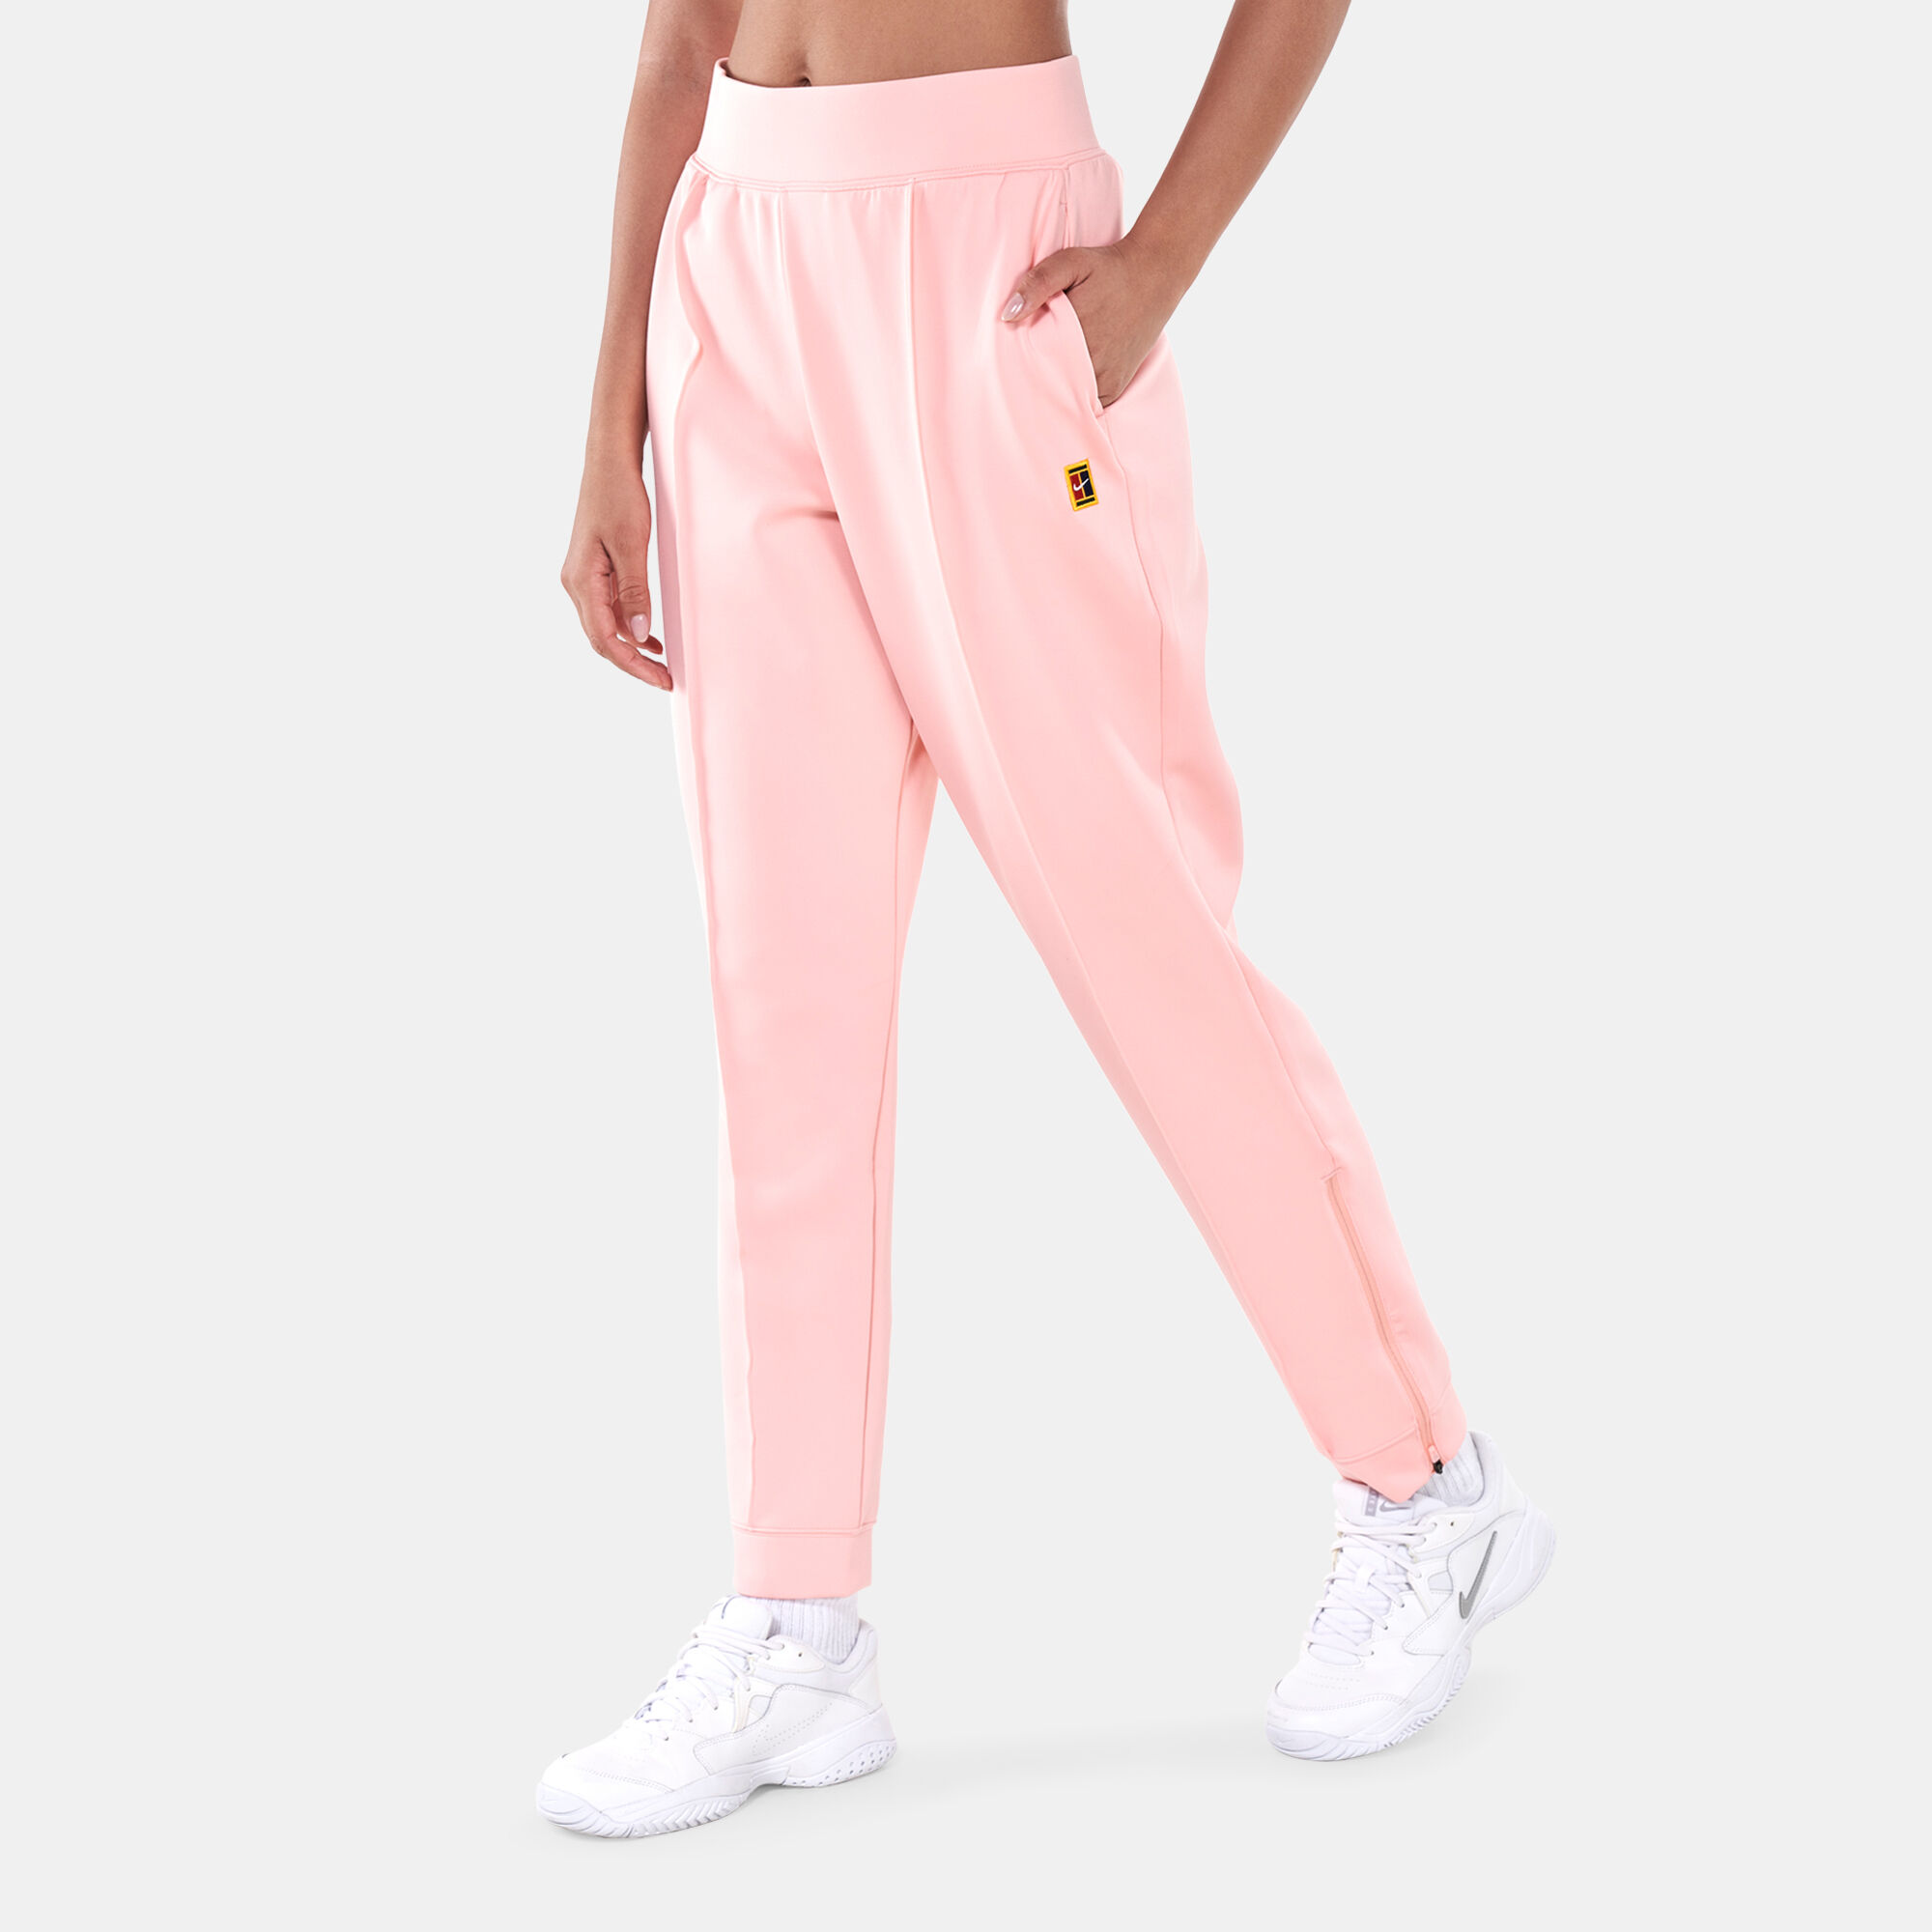 Nike x Nocta Track Pants – buy now at Asphaltgold Online Store!